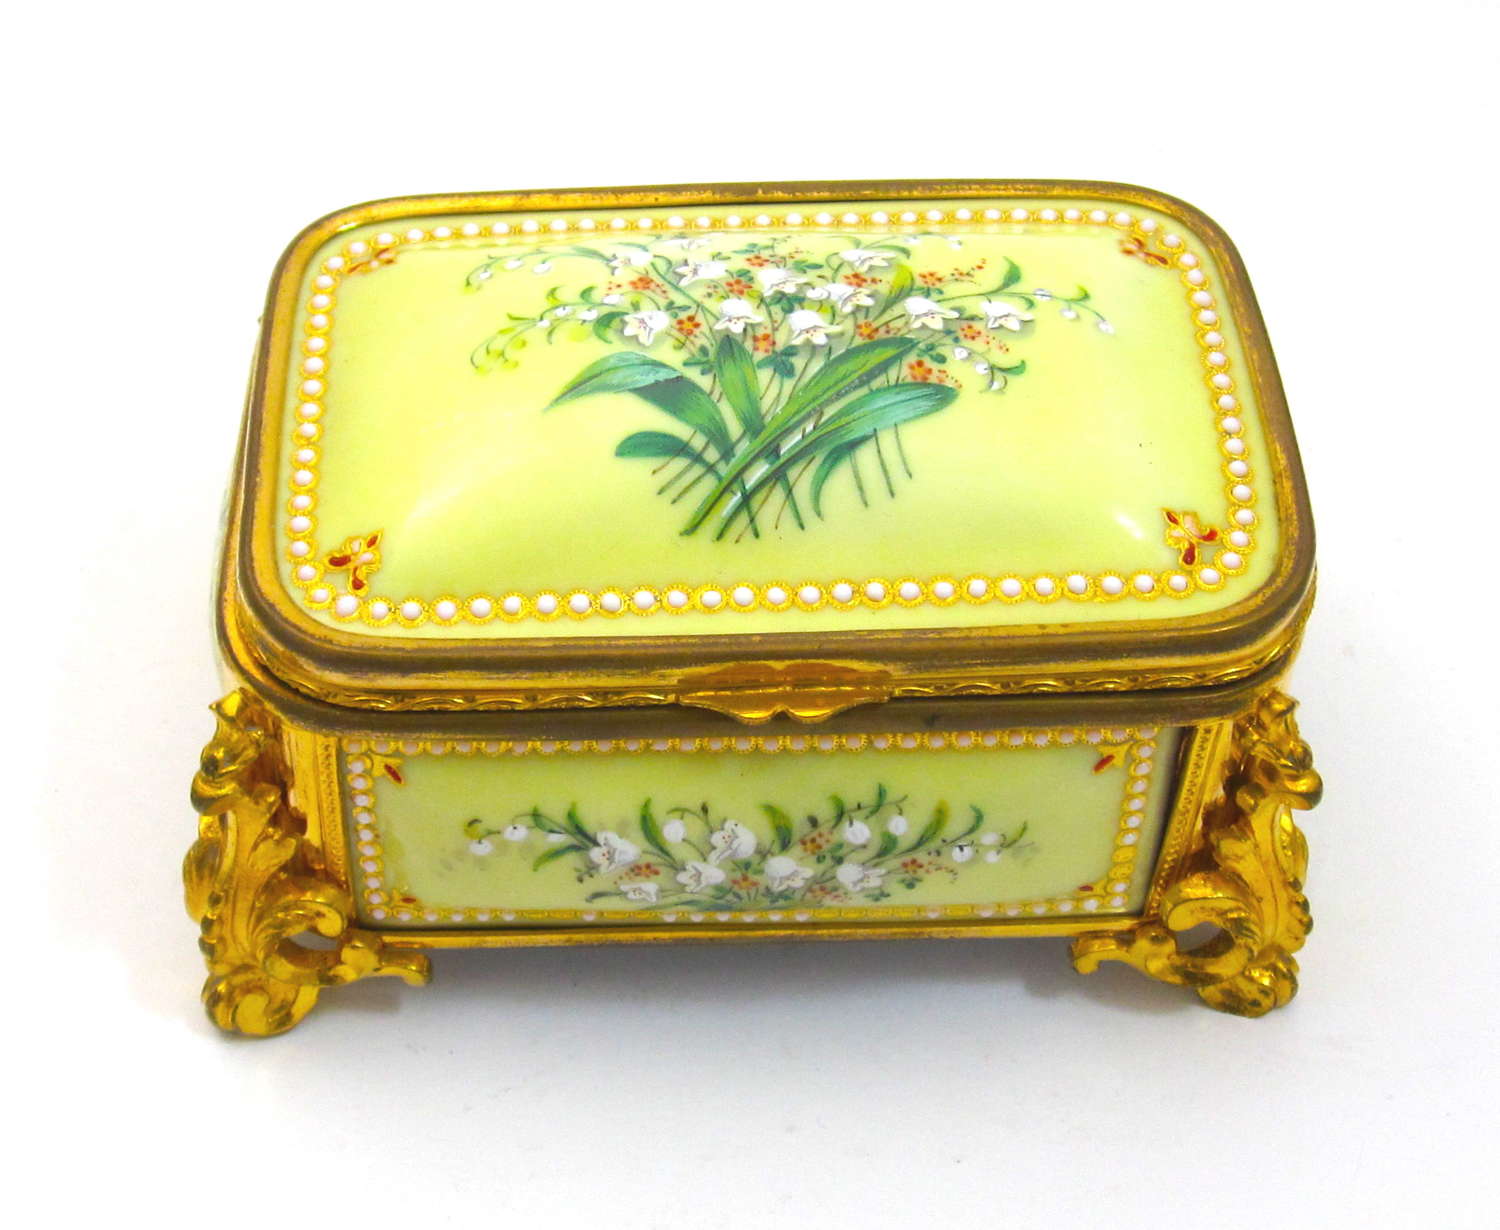 Palais Royal Antique Yellow 'Bombe' Jewel Casket by Tahan